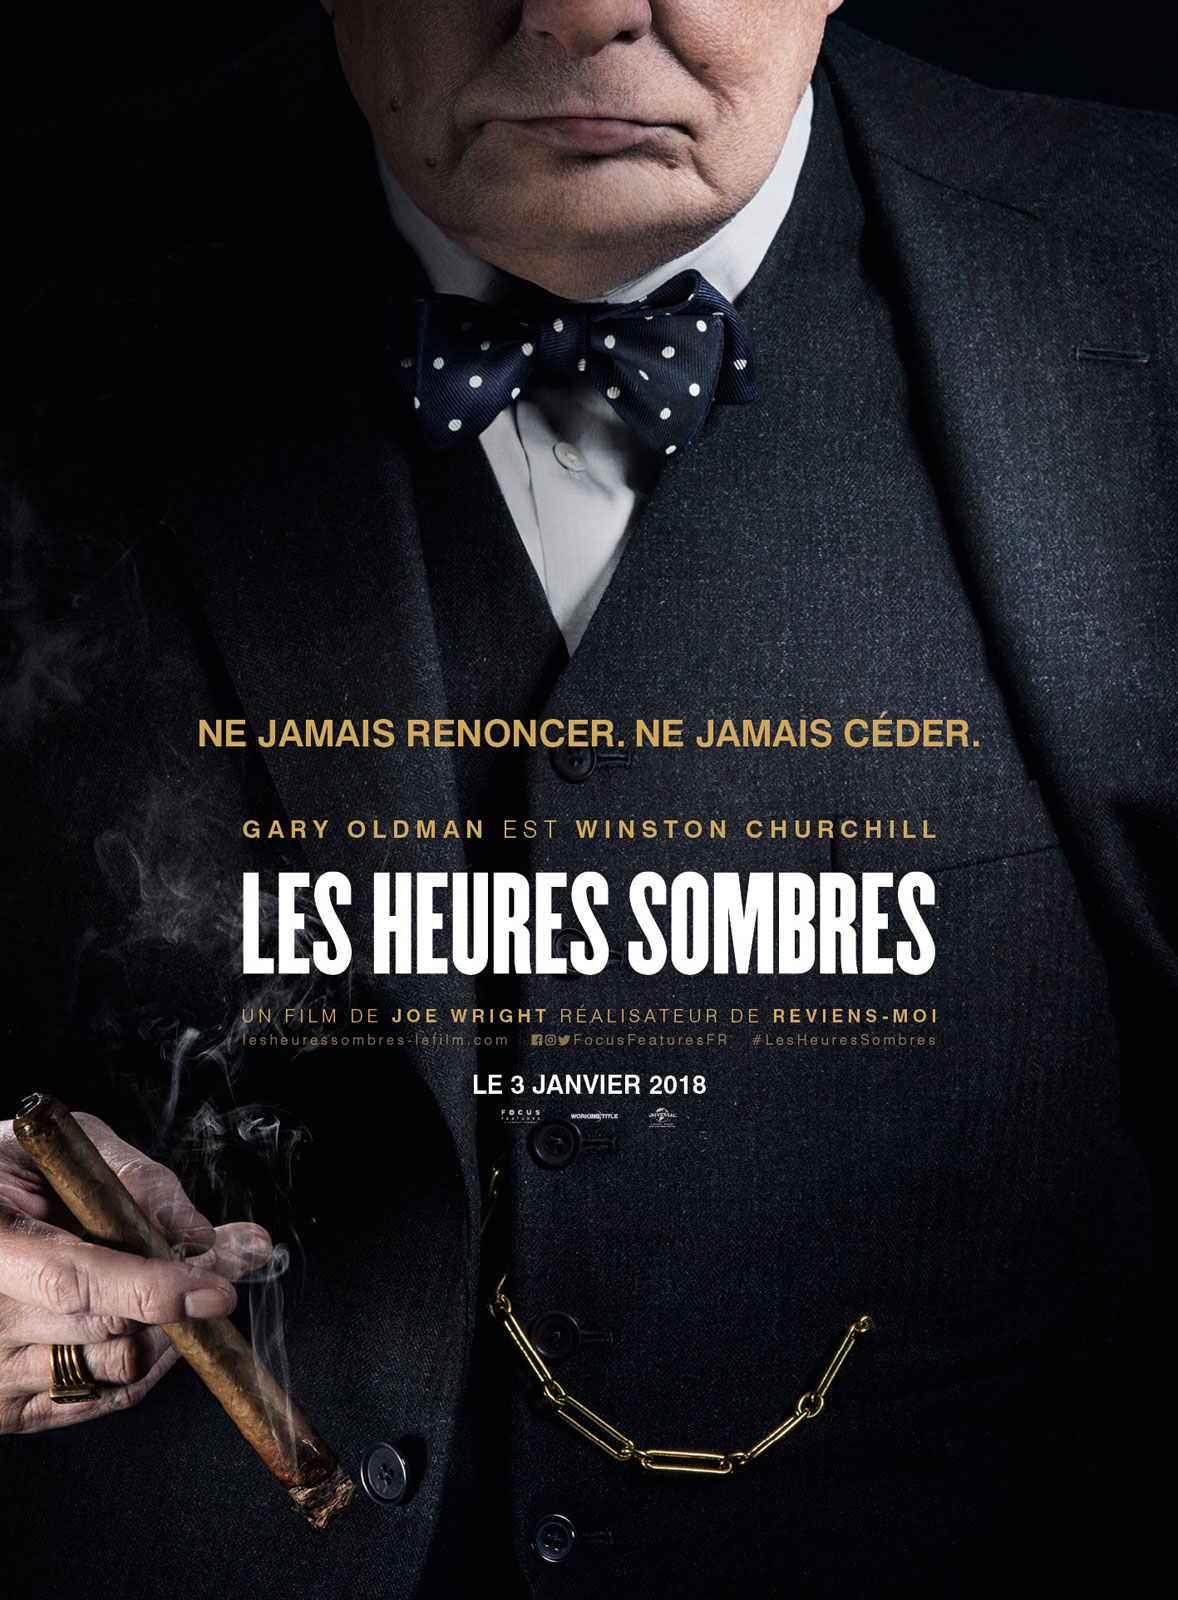 Les heures sombres FRENCH DVDRIP x264 2018